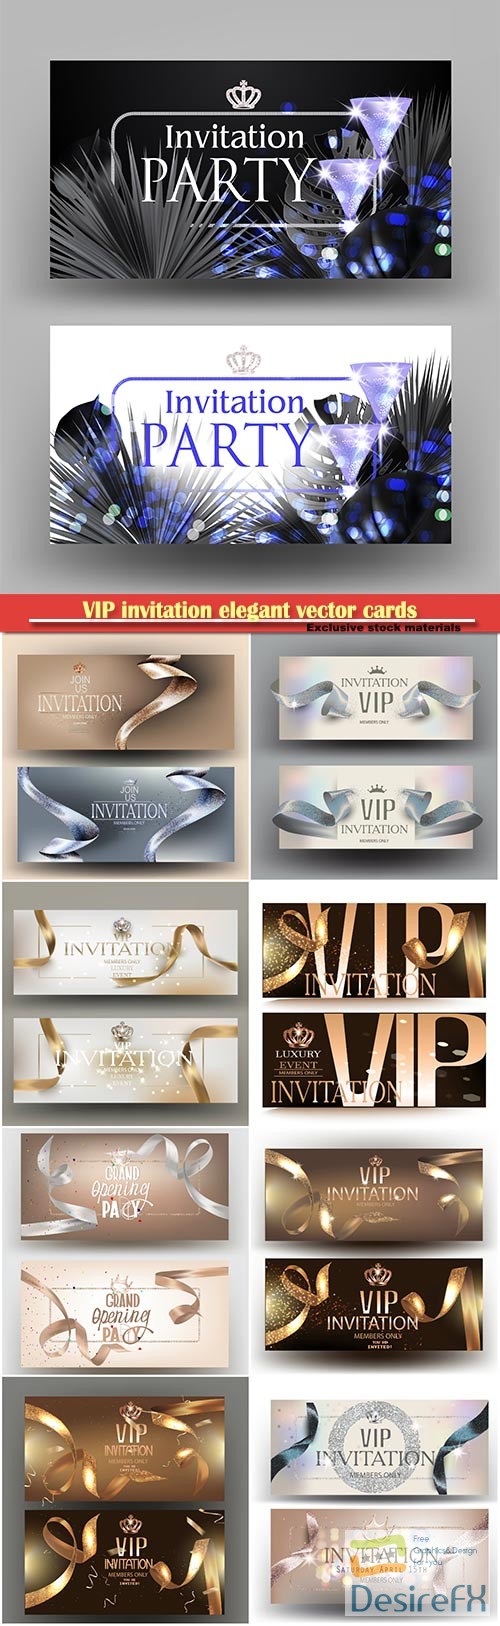 VIP invitation elegant vector cards with ribbons and pearl background